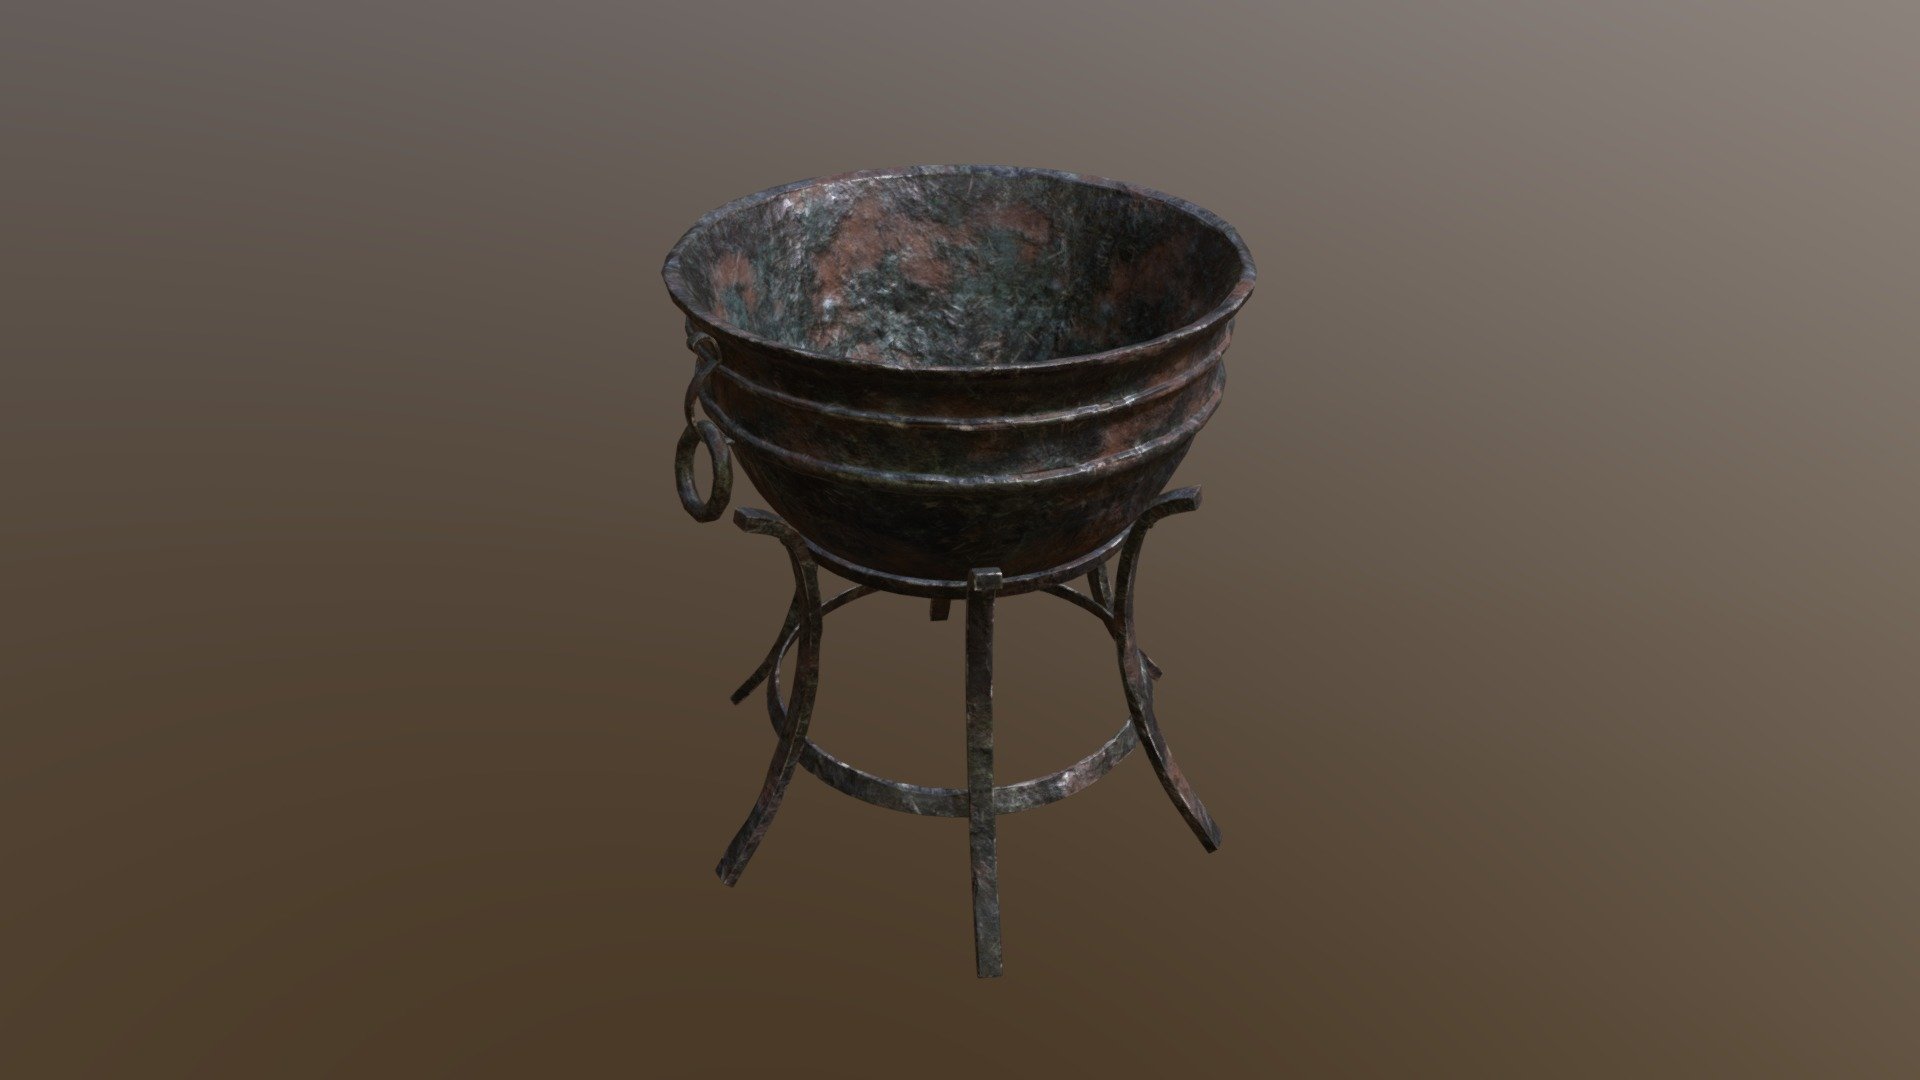 Old Metal Medieval Fire Pit Cauldron 3D Model. This model contains the Old Metal Medieval Fire Pit Cauldron itself 

All modeled in Maya, textured with Substance Painter.

The model was built to scale and is UV unwrapped properly. Contains only one 4K texture set.  

⦁   11170 tris. 

⦁   Contains: .FBX .OBJ and .DAE

⦁   Model has clean topology. No Ngons.

⦁   Built to scale

⦁   Unwrapped UV Map

⦁   4K Texture set

⦁   High quality details

⦁   Based on real life references

⦁   Renders done in Marmoset Toolbag

Polycount: 

verts 5642

edges 11264

faces 5644

tris 11170

If you have any questions please feel free to ask me 3d model